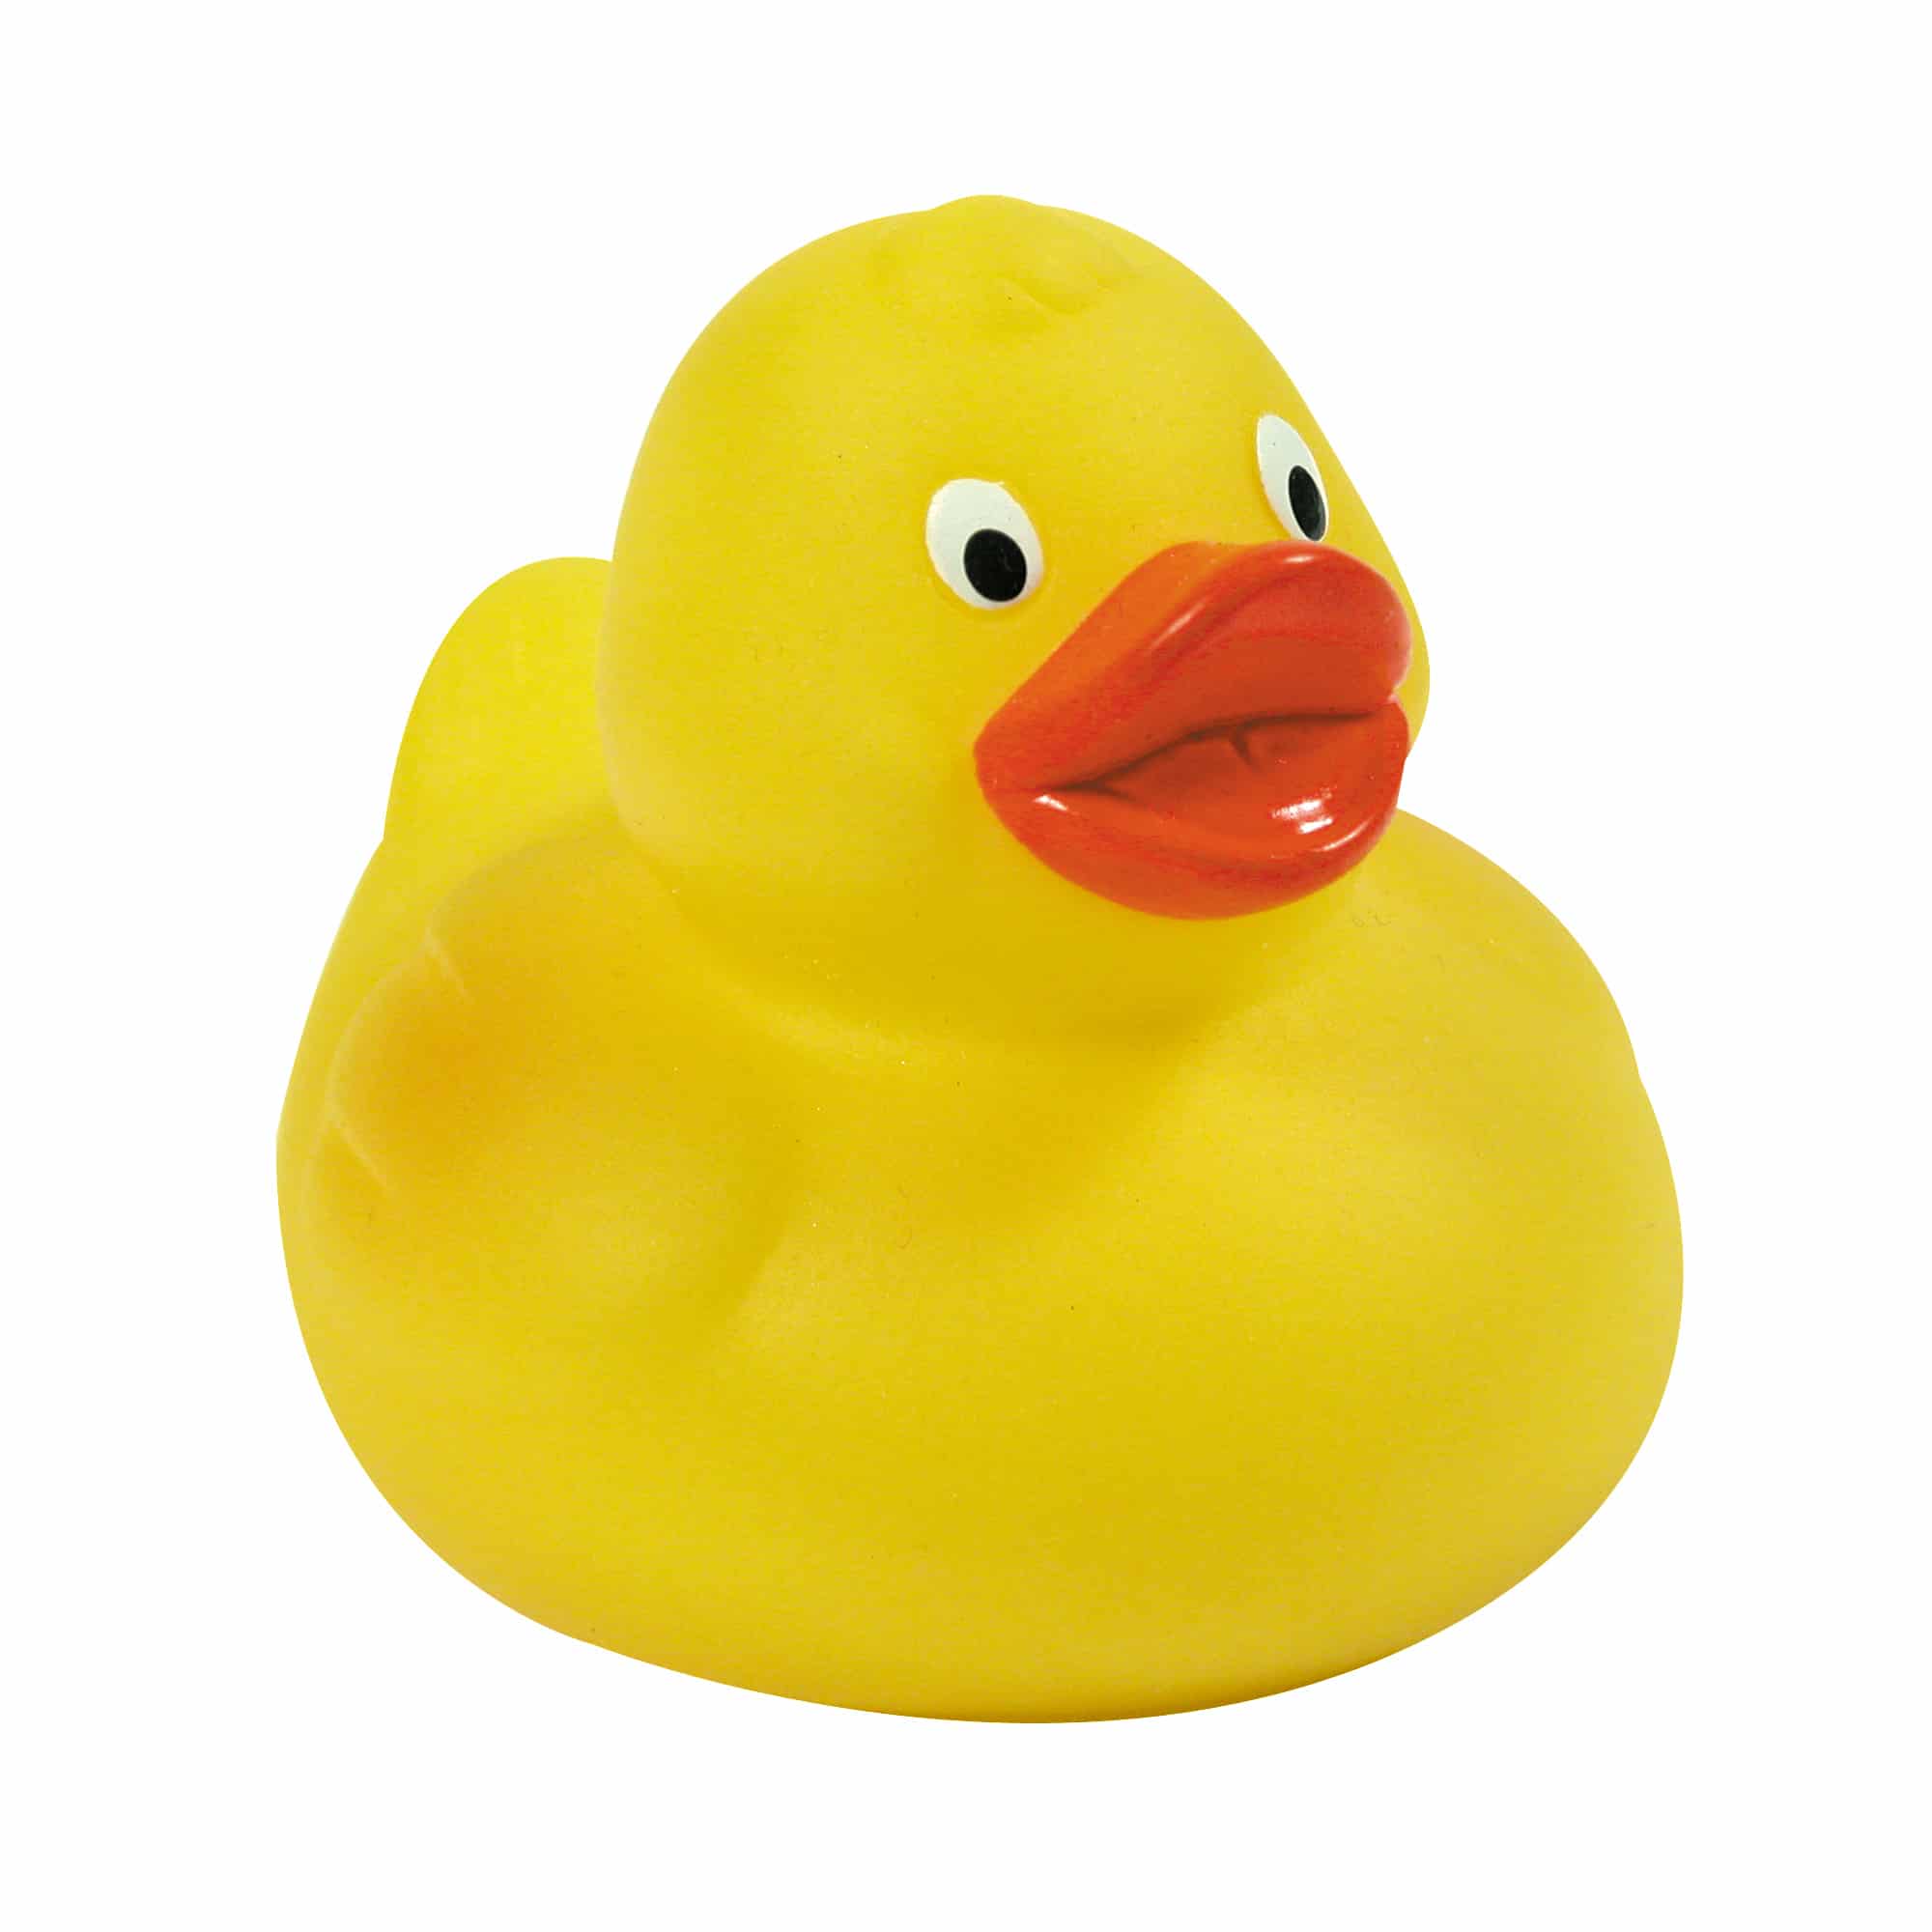 Classic Yellow Rubber Duck-Bath Toys-Schylling-Yellow Springs Toy Company